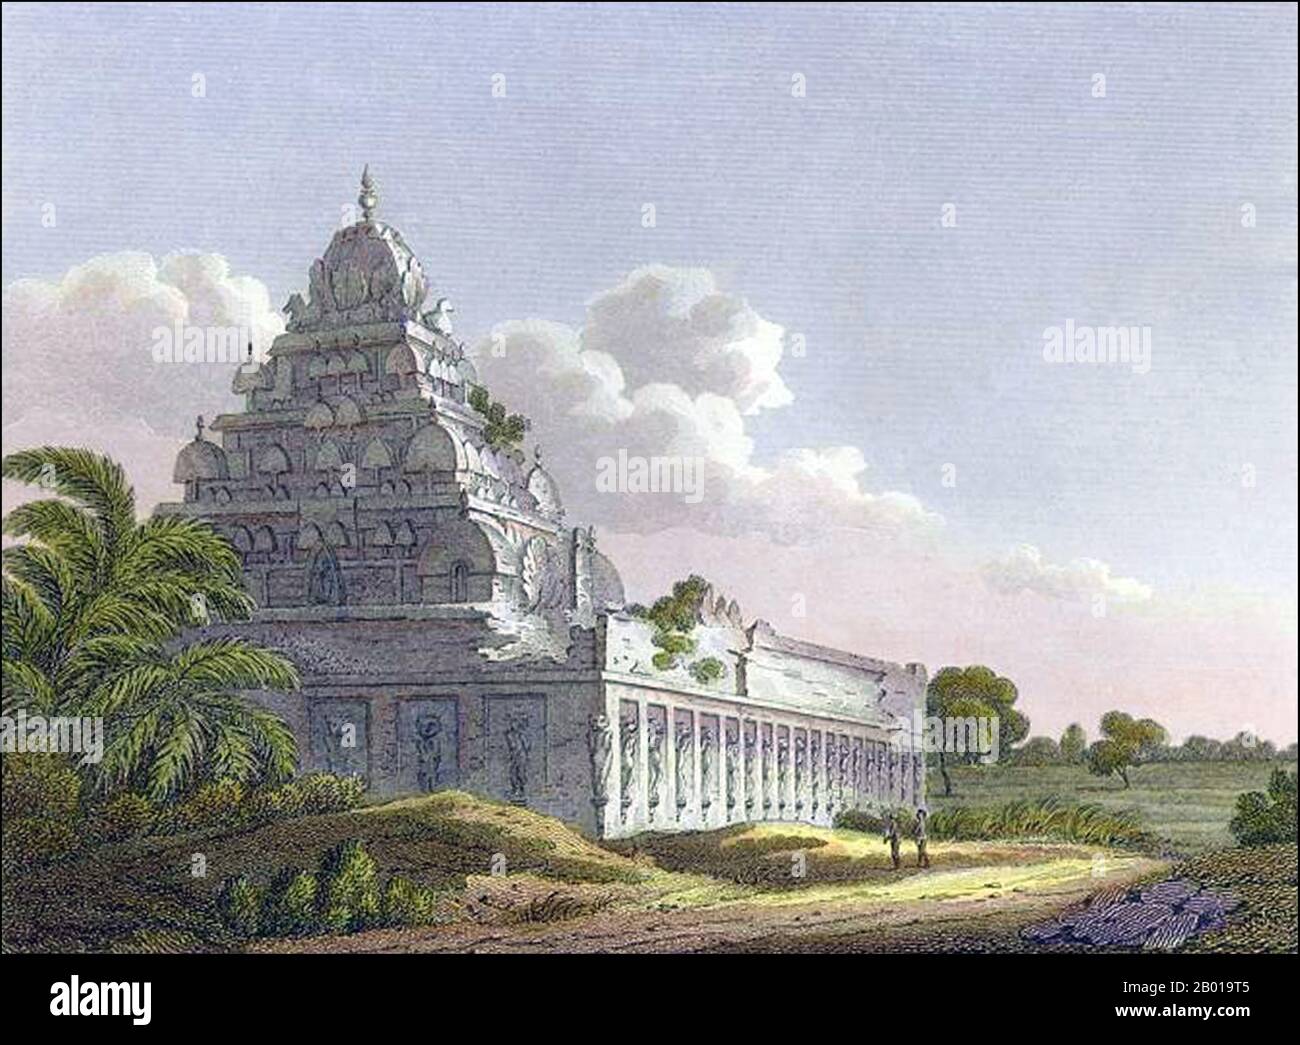 India: A Hindu temple at Kanchipuram, Tamil Nadu. Copper engraving by James Sargant Storer (1771-1853) after a picture by Henry Salt (1780-1827), 1811.  Kanchipuram, Kanchi, or Kancheepuram (also known as Conjeveram/Conjeevaram) is a temple city and a municipality in Kanchipuram district in the Indian state of Tamil Nadu. It is a temple town and the headquarters of Kanchipuram district. In ancient times it was called Kanchi and Kanchiampathi.  There are several large temples (including some of the greatest Vishnu Temples and Shiva Temples of Tamil Nadu), including Varadharaja Perumal Temple. Stock Photo